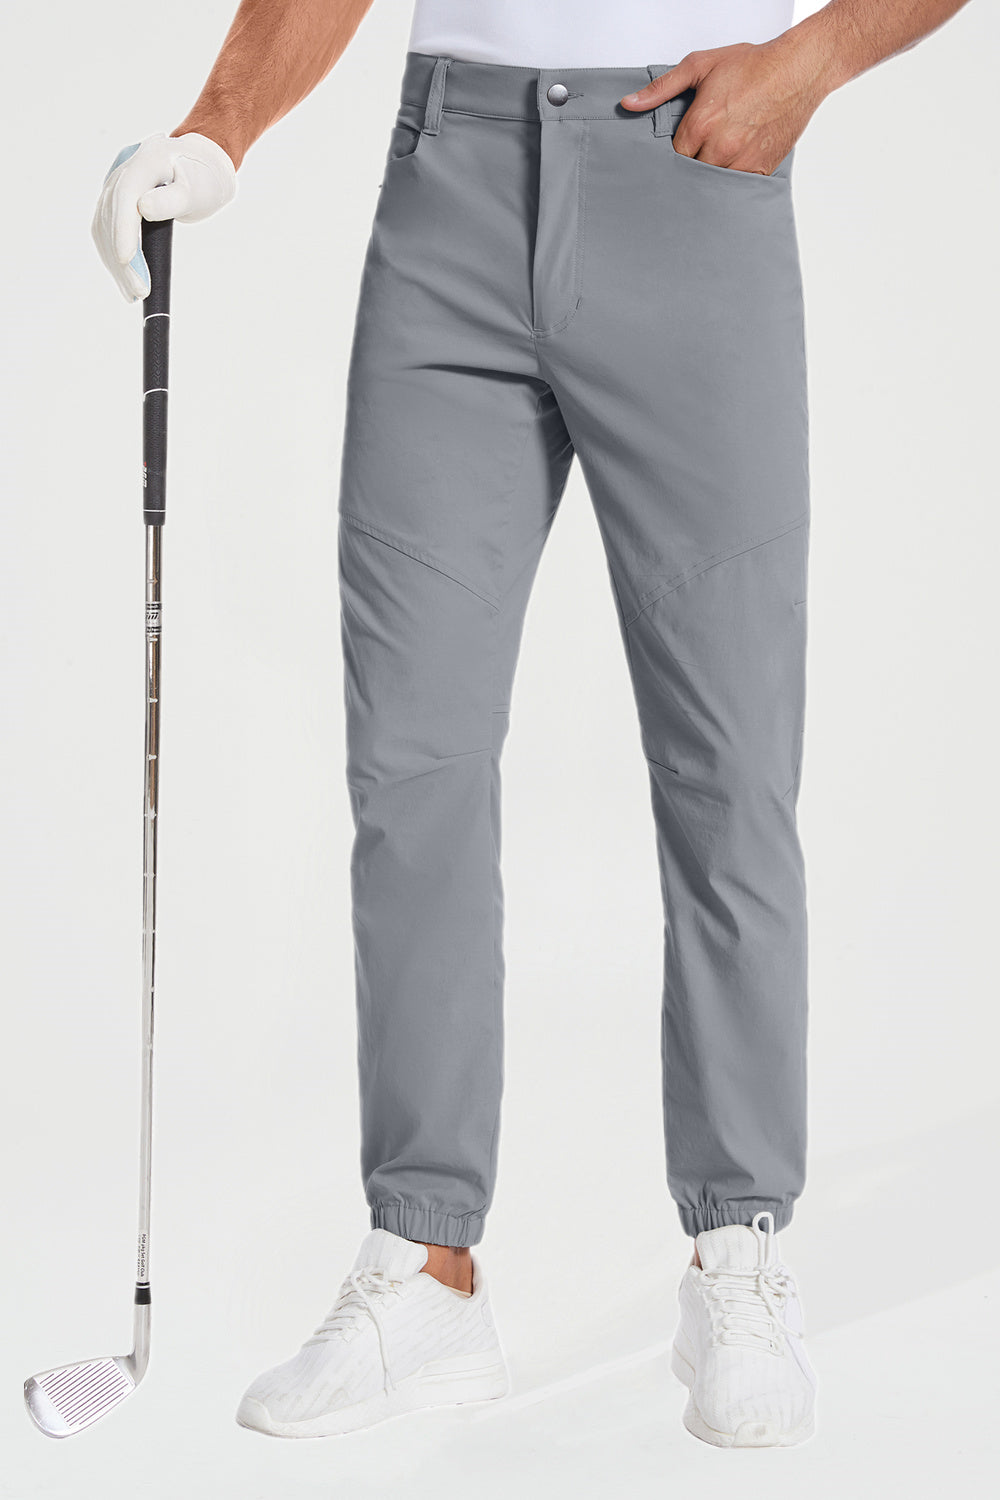 PULI Men's Stretch Golf Joggers Pants with 4 Pockets Waterproof